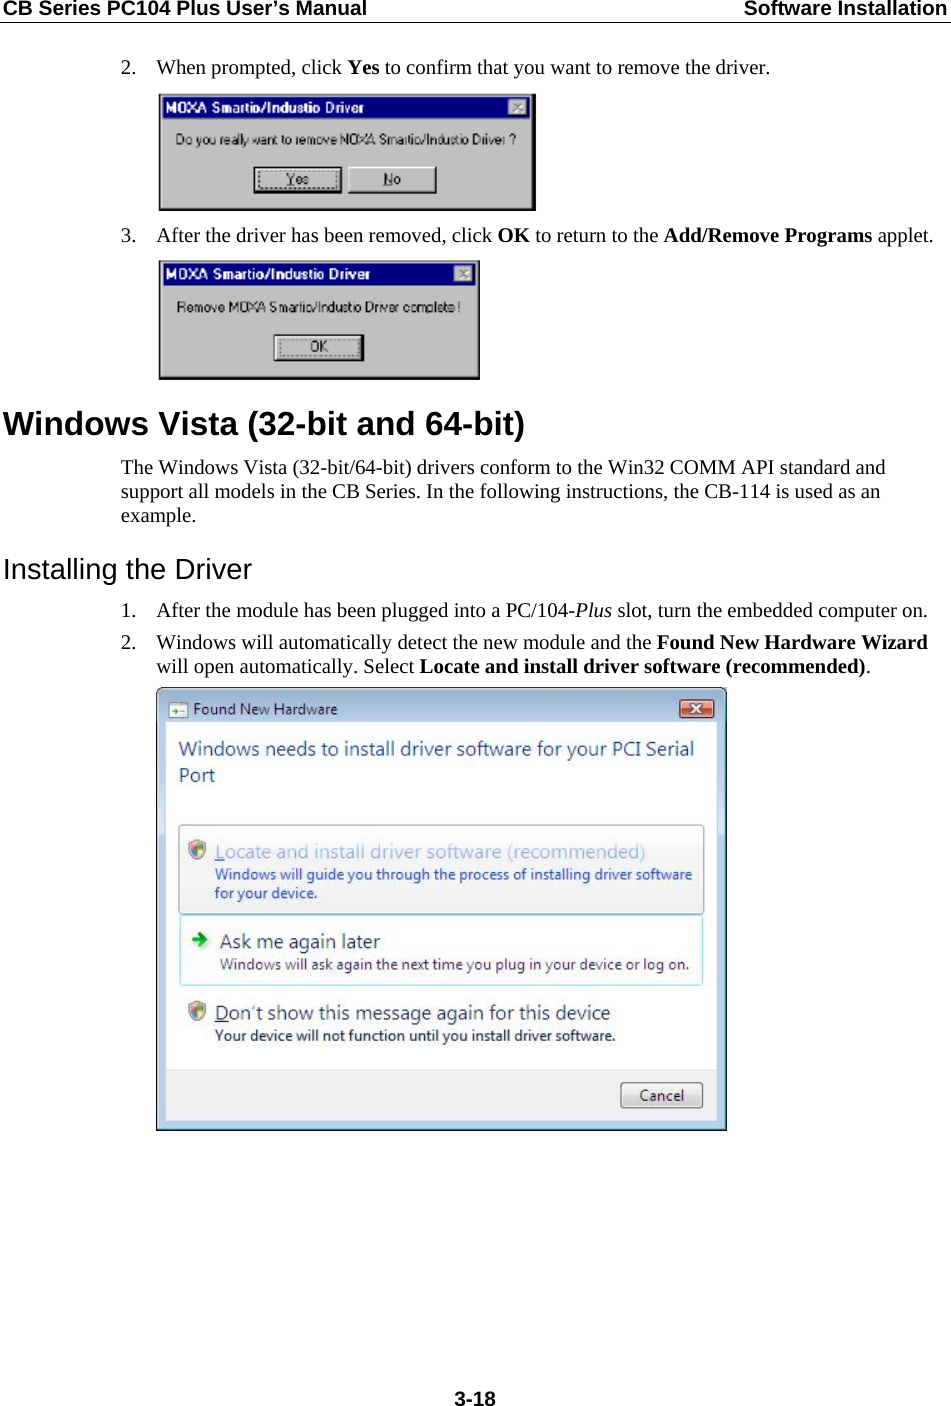 CB Series PC104 Plus User’s Manual  Software Installation 2. When prompted, click Yes to confirm that you want to remove the driver.  3. After the driver has been removed, click OK to return to the Add/Remove Programs applet.  Windows Vista (32-bit and 64-bit) The Windows Vista (32-bit/64-bit) drivers conform to the Win32 COMM API standard and support all models in the CB Series. In the following instructions, the CB-114 is used as an example. Installing the Driver 1. After the module has been plugged into a PC/104-Plus slot, turn the embedded computer on. 2. Windows will automatically detect the new module and the Found New Hardware Wizard will open automatically. Select Locate and install driver software (recommended).   3-18